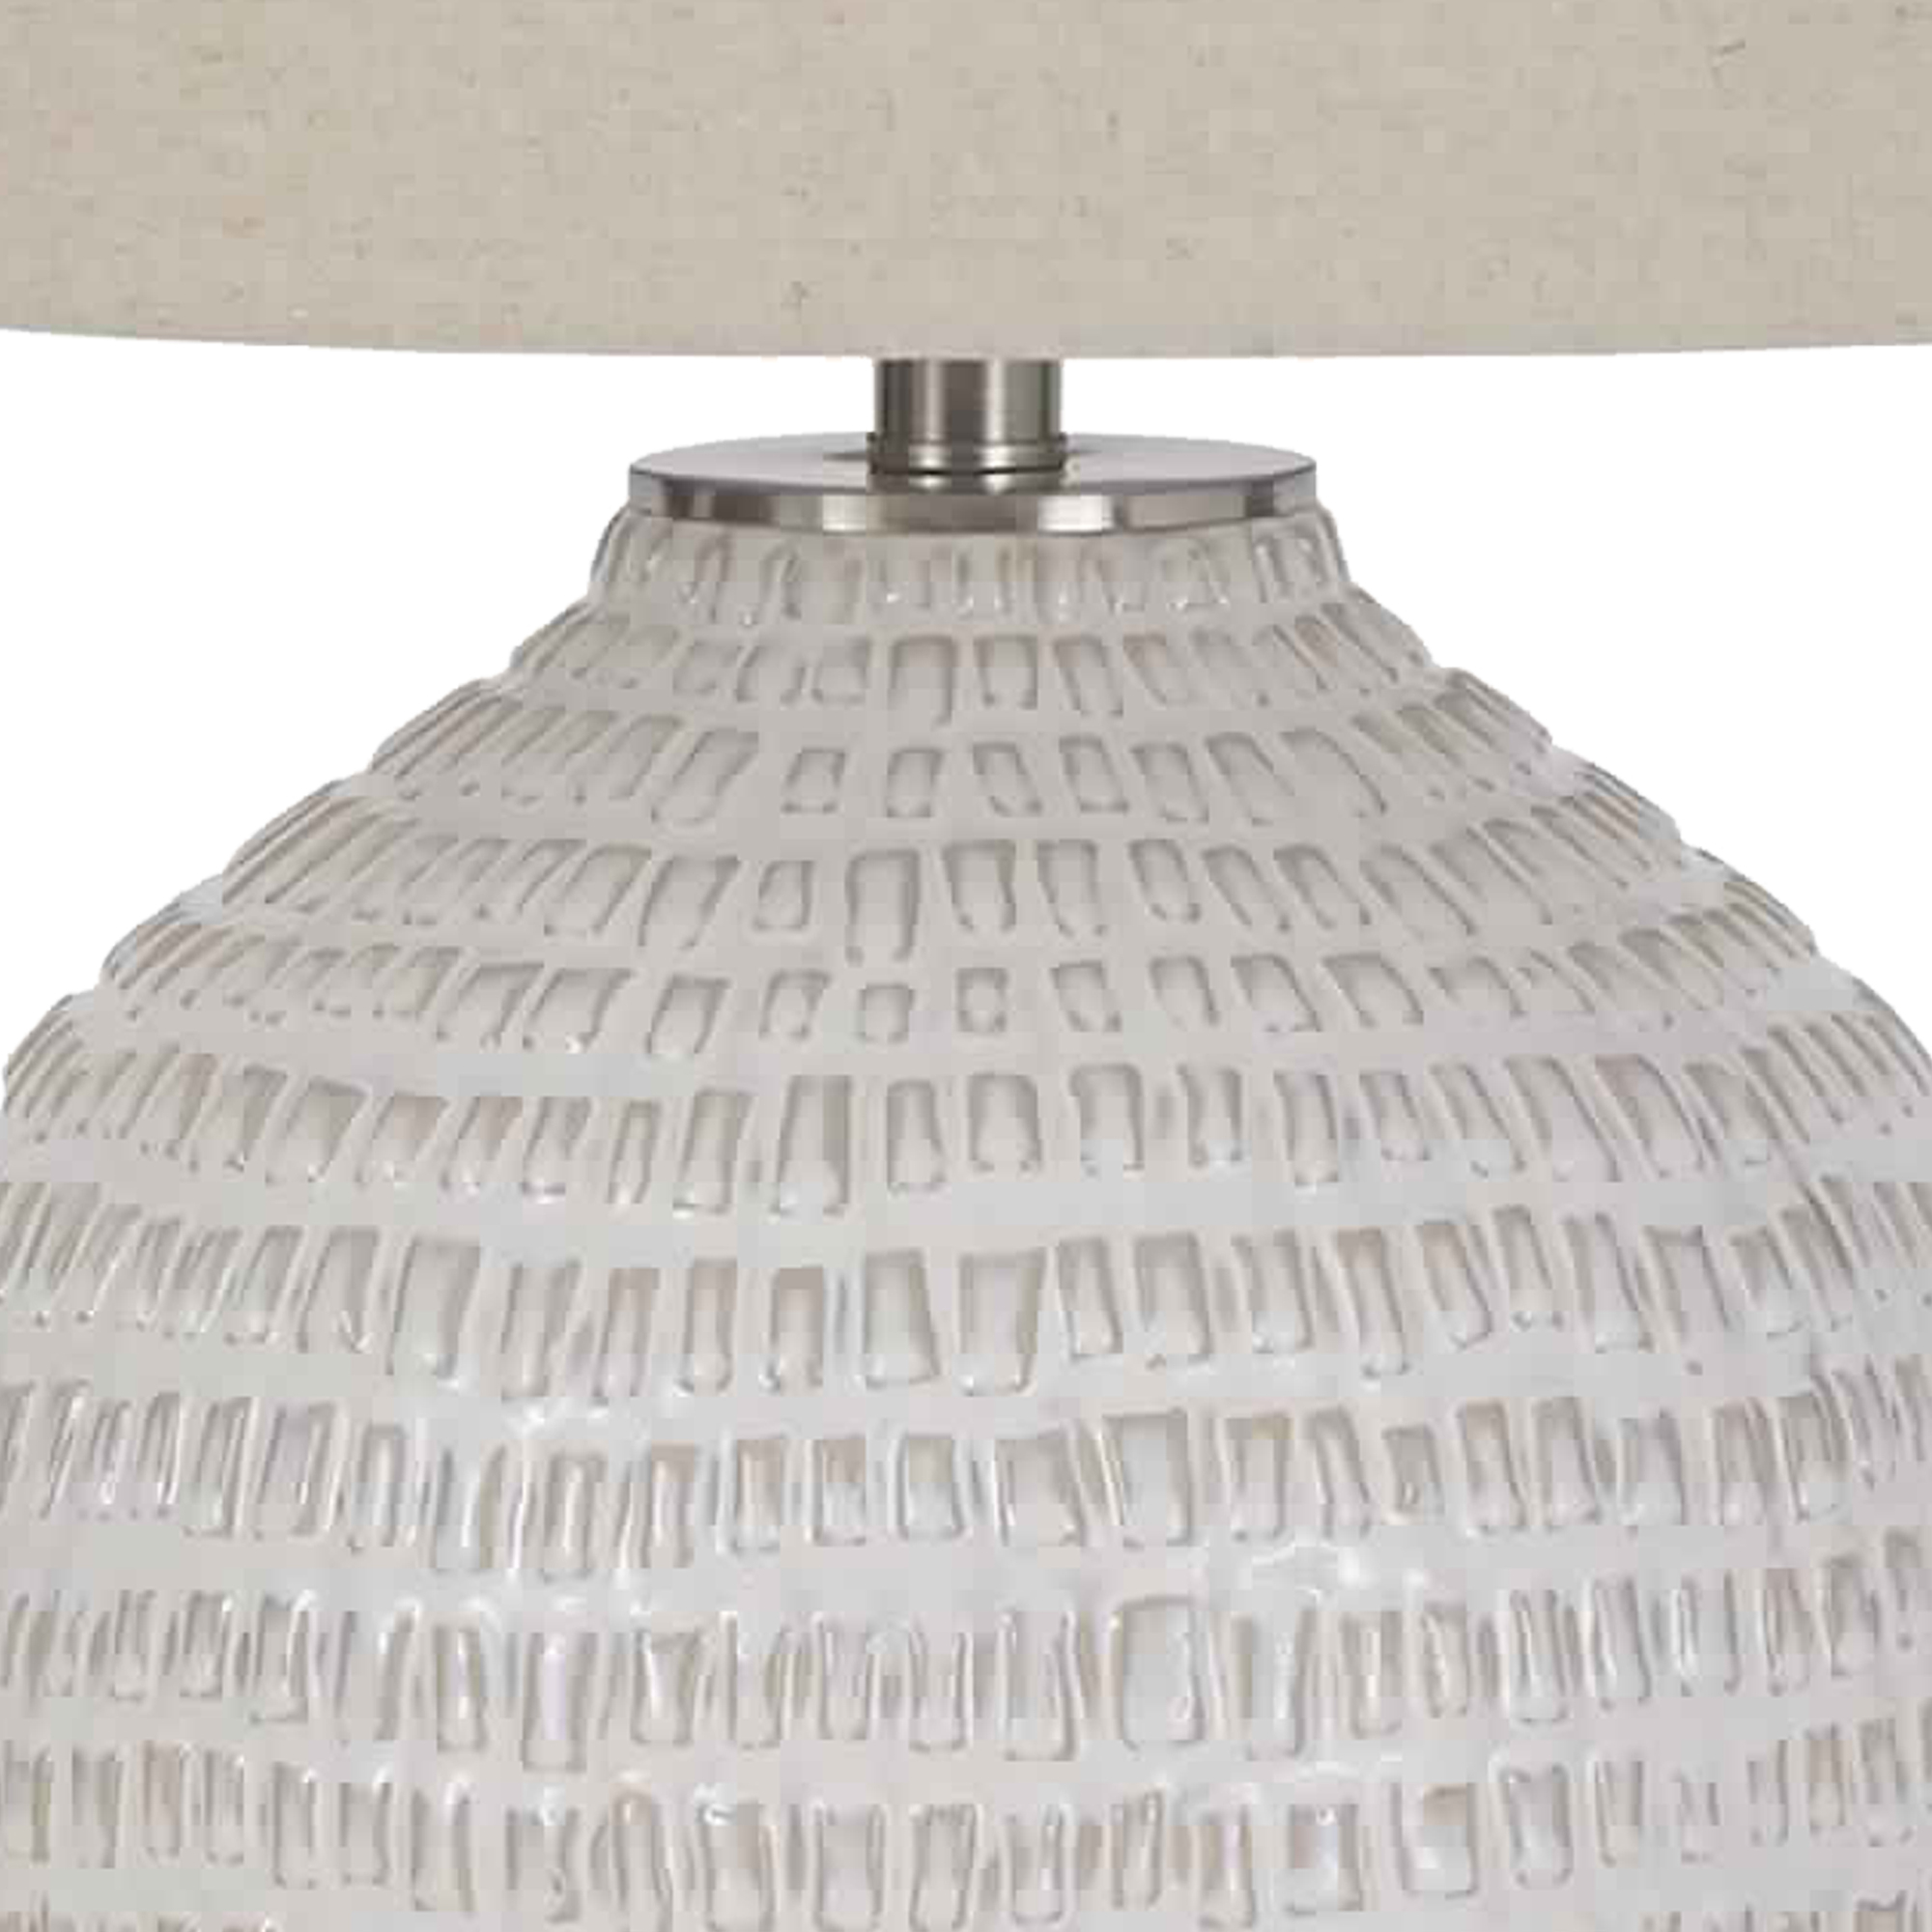 Textured Ceramic Frame Table Lamp With Fabric Shade, Beige And White- Saltoro Sherpi